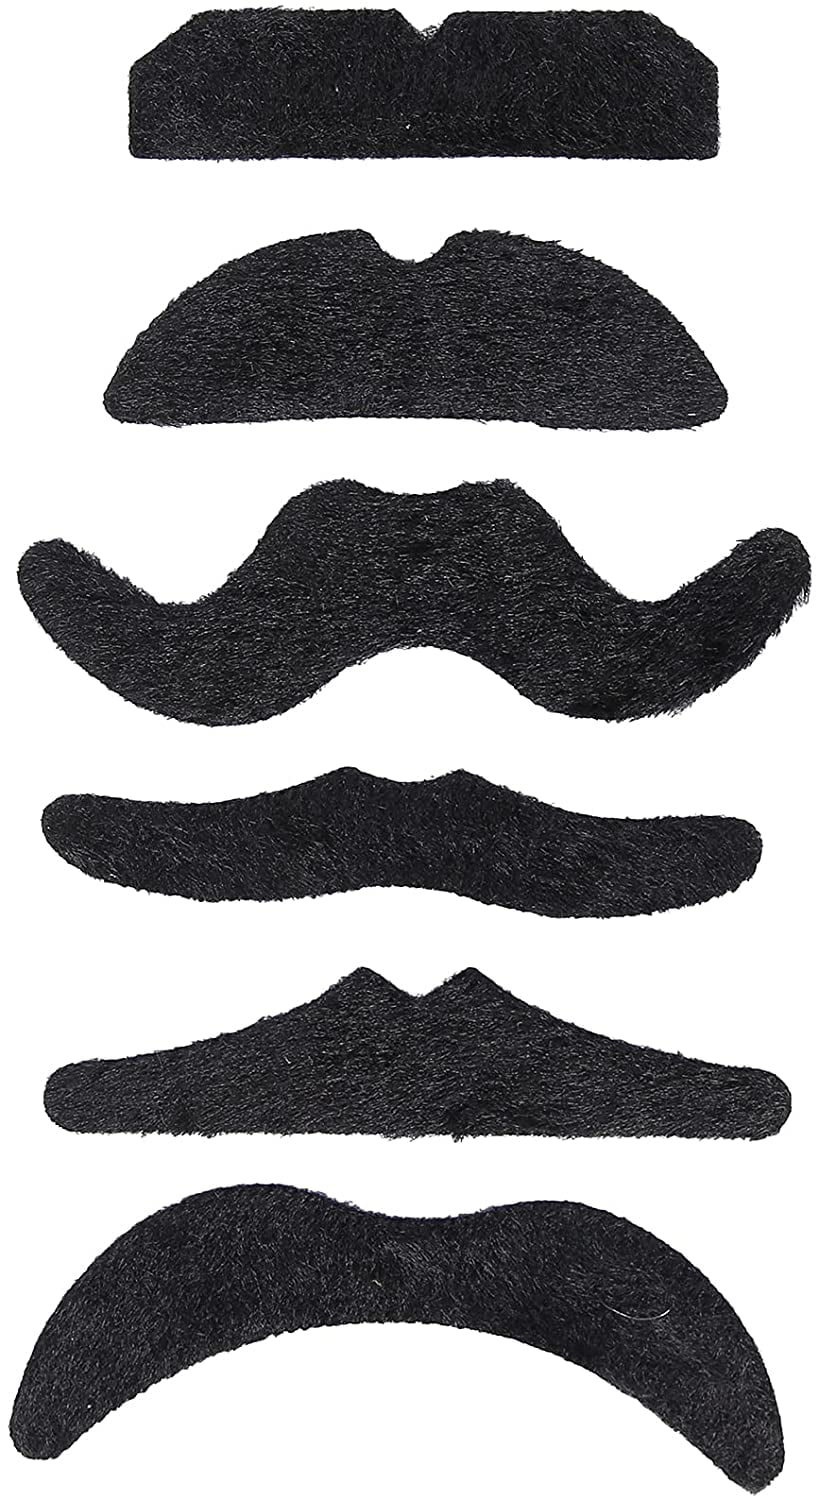 Self Adhesive Mustaches for Masquerade Party & Performance Black LERORO 48 PCS Novelty Fake Mustaches Mustache Party Supplies 